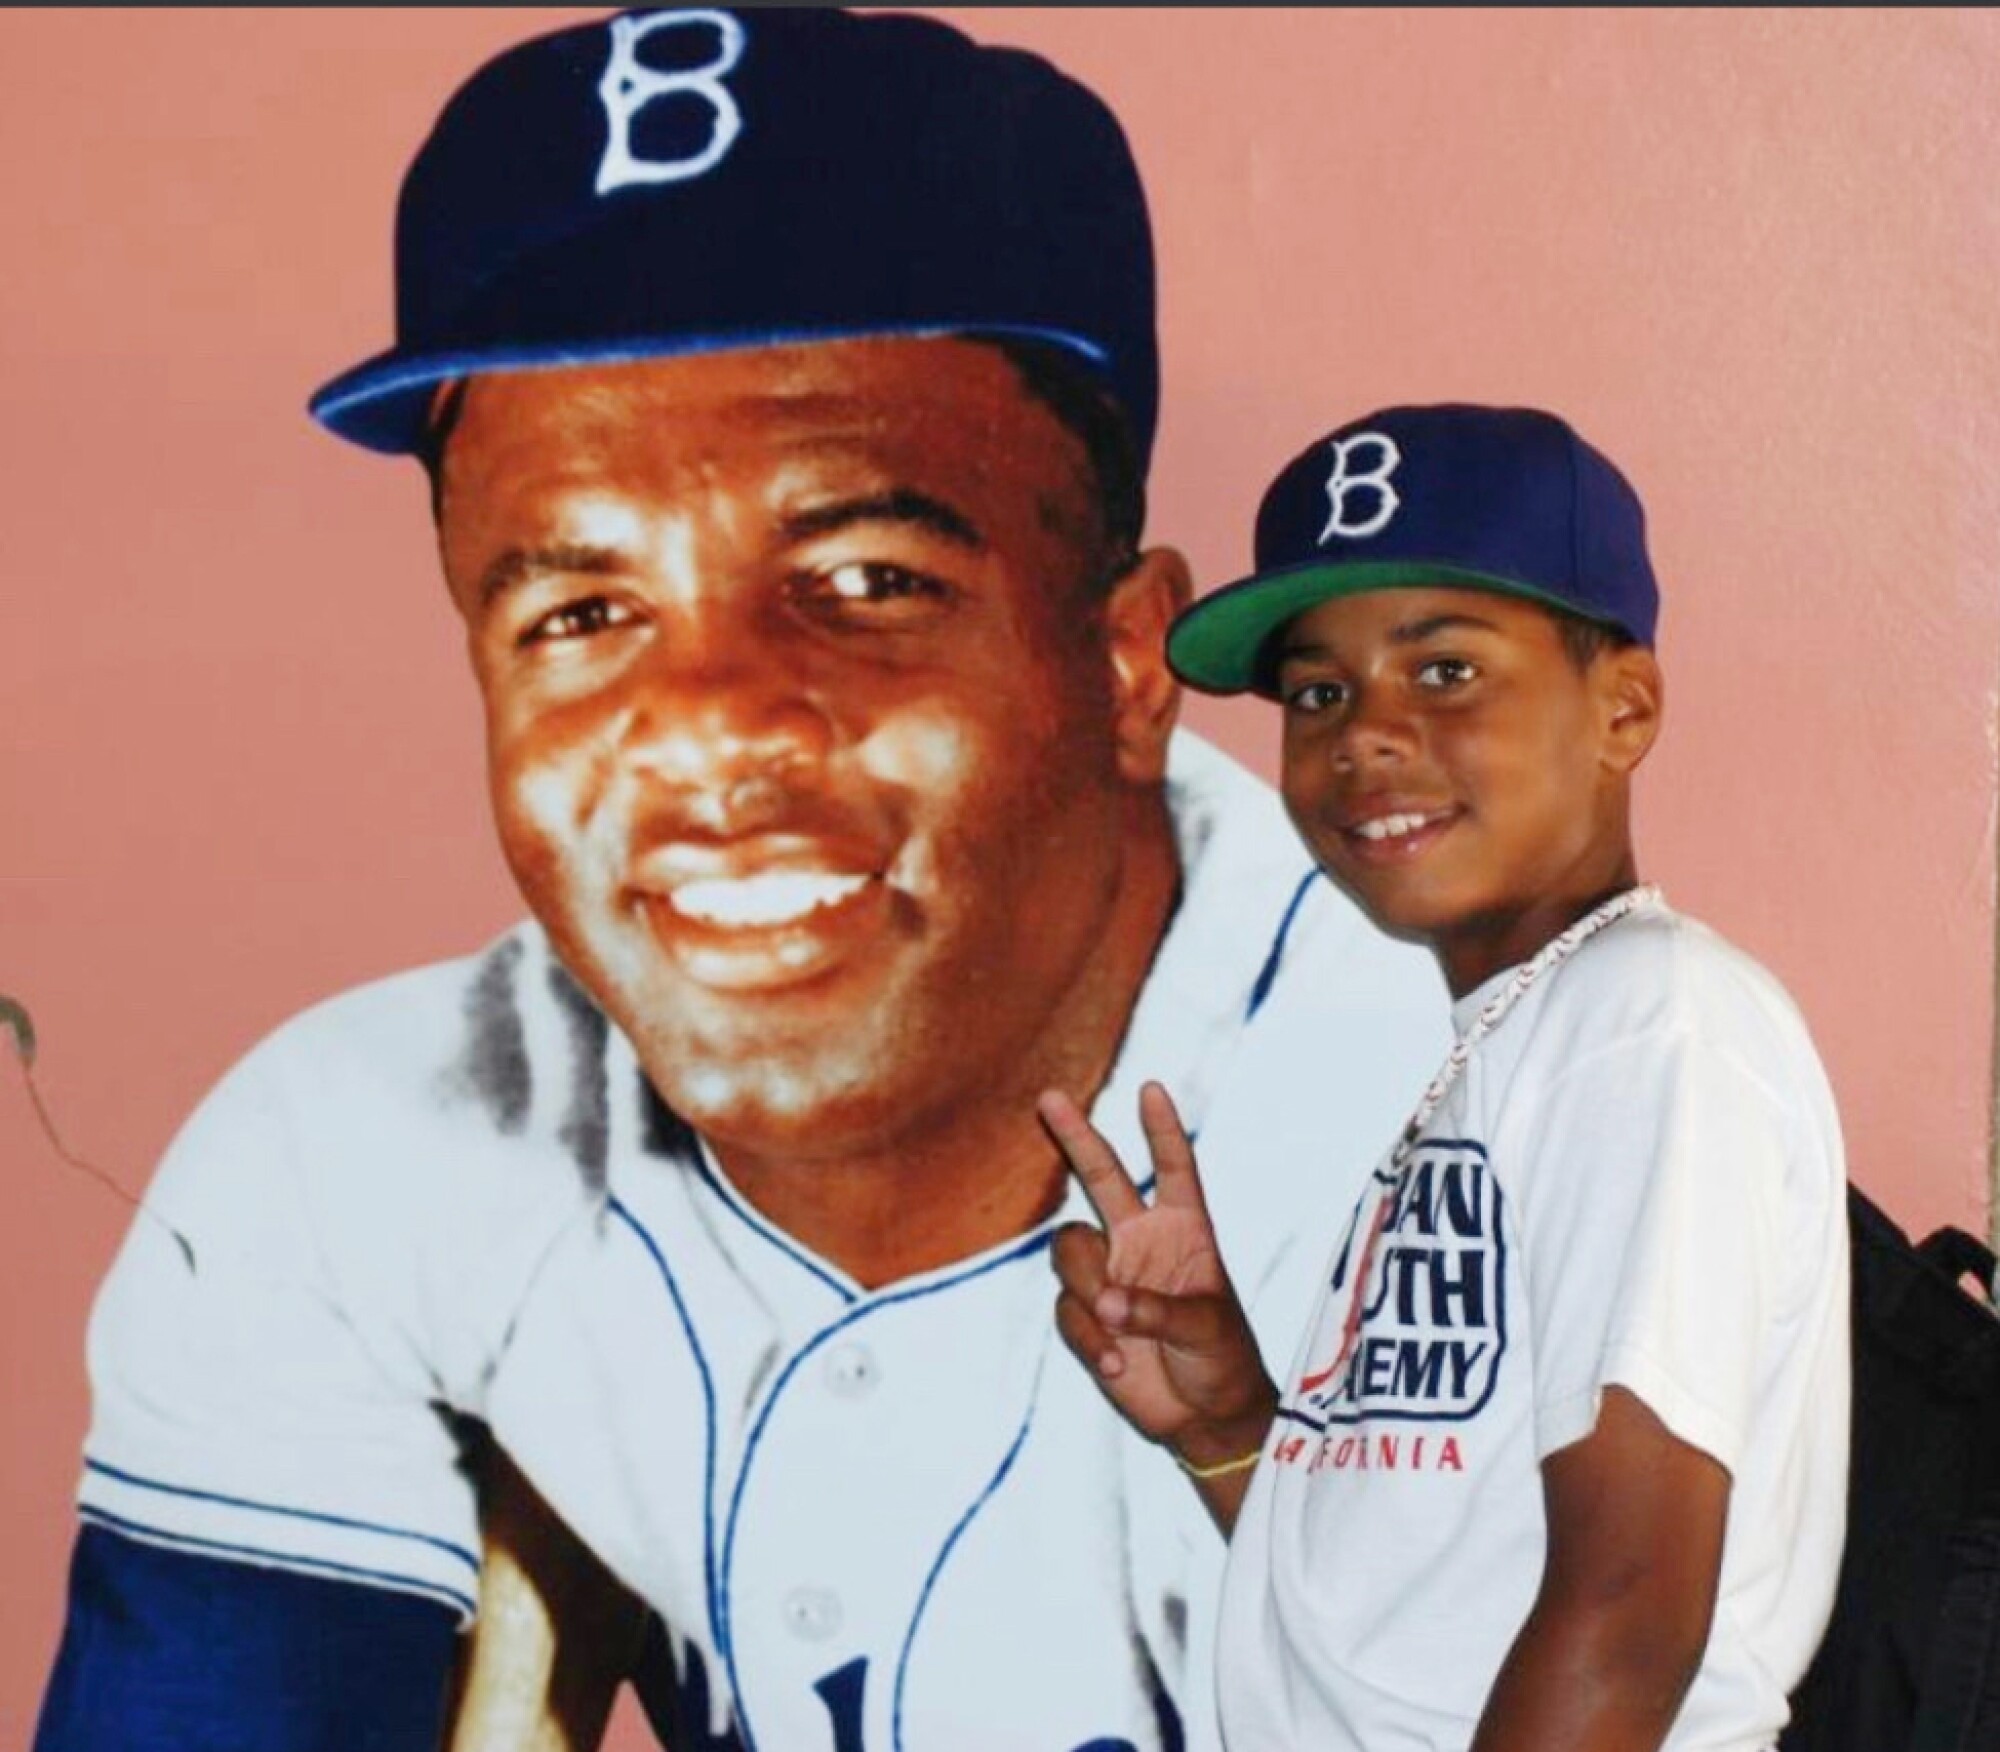 A young Hunter Greene stands in front of a photo of Dodgers legend Jackie Robinson.